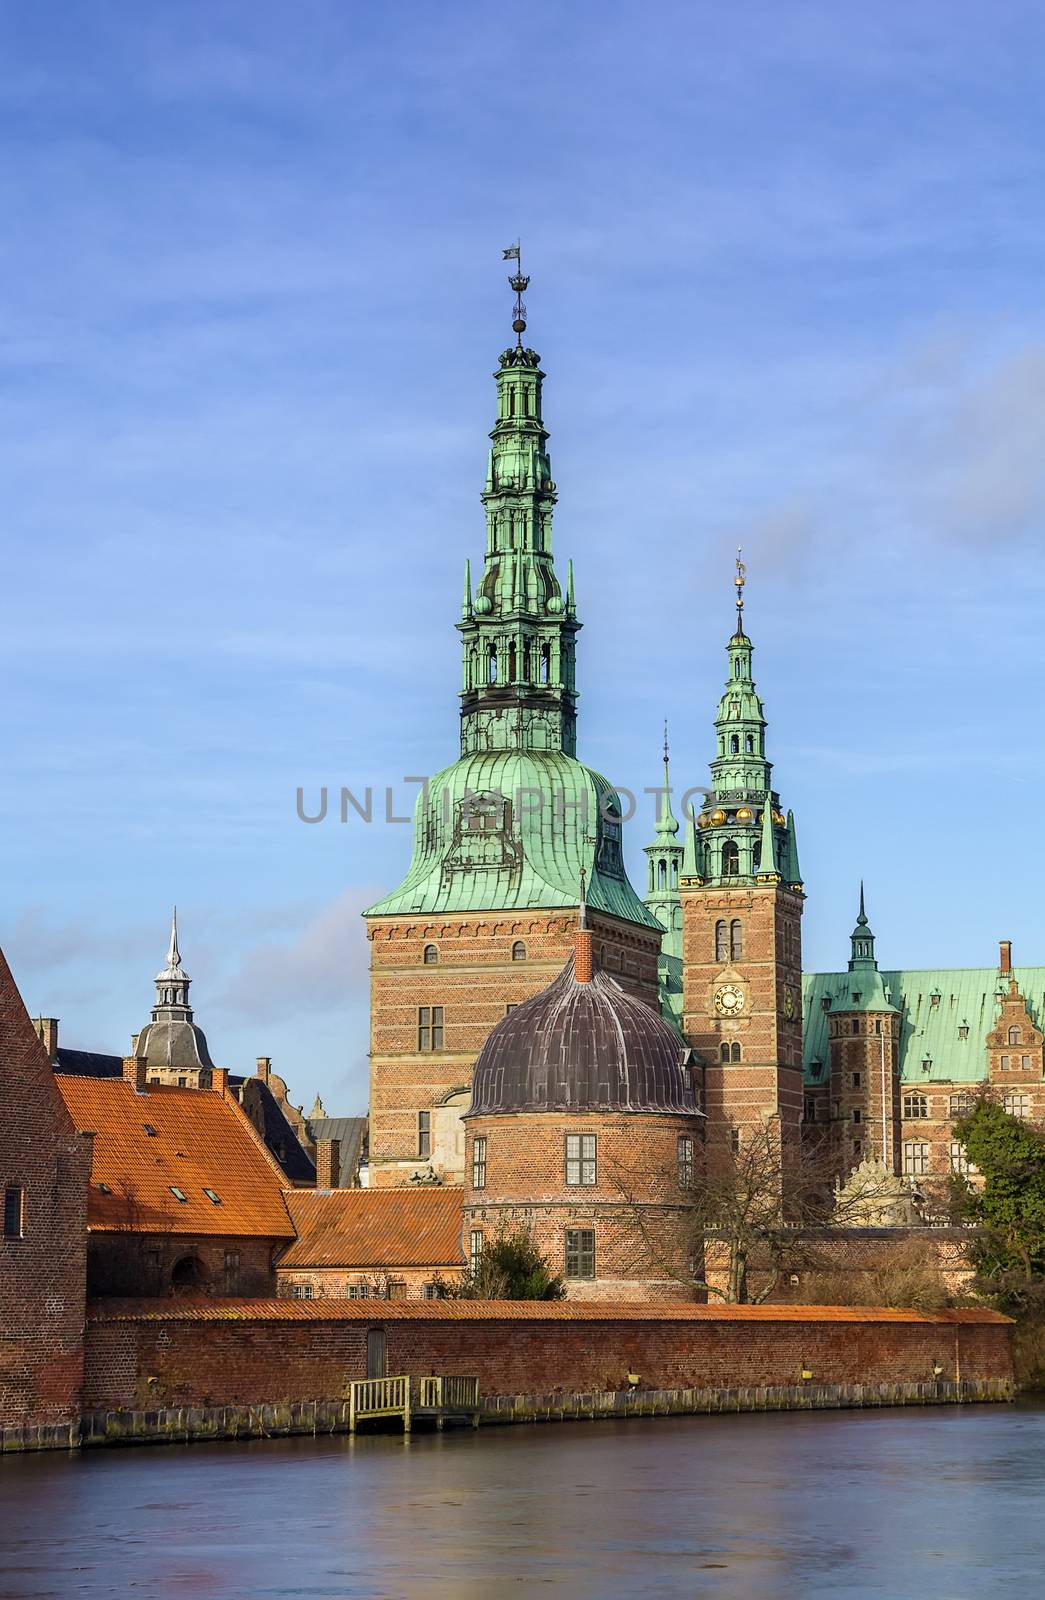 View to Frederiksborg slot from Palace Lake, Denmark